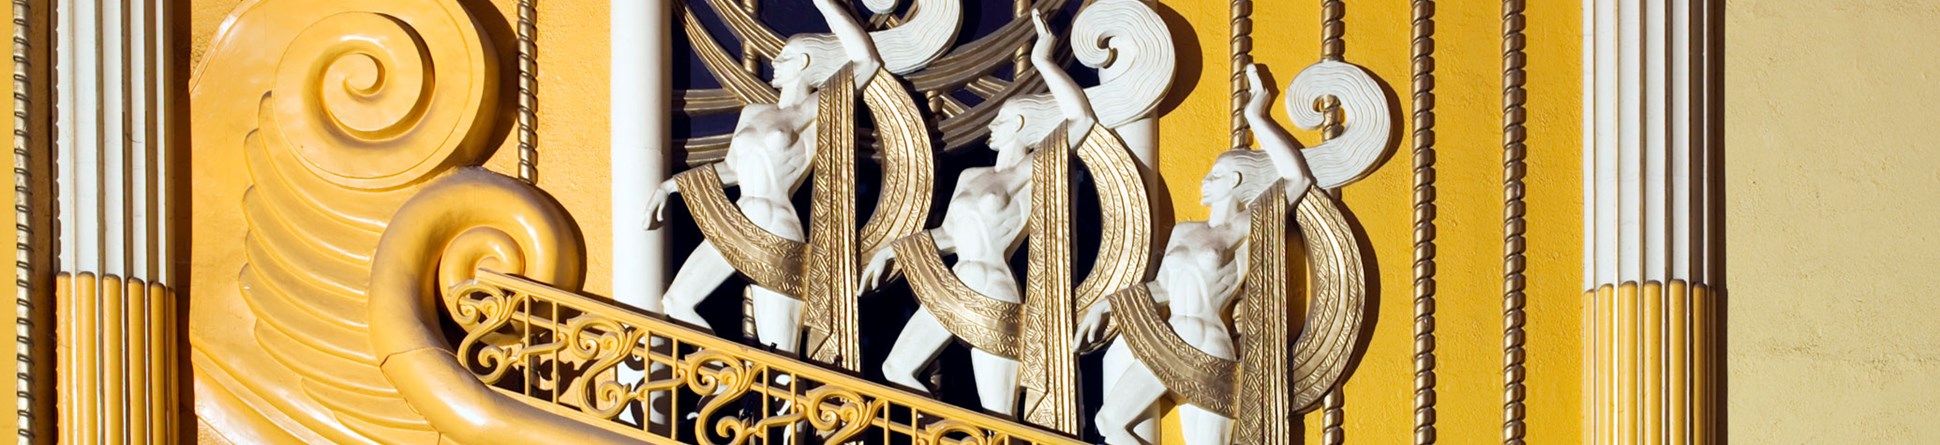 A detail of plaster decoration in vibrant yellow and white, including a row of three mythical figures in an art deco style.